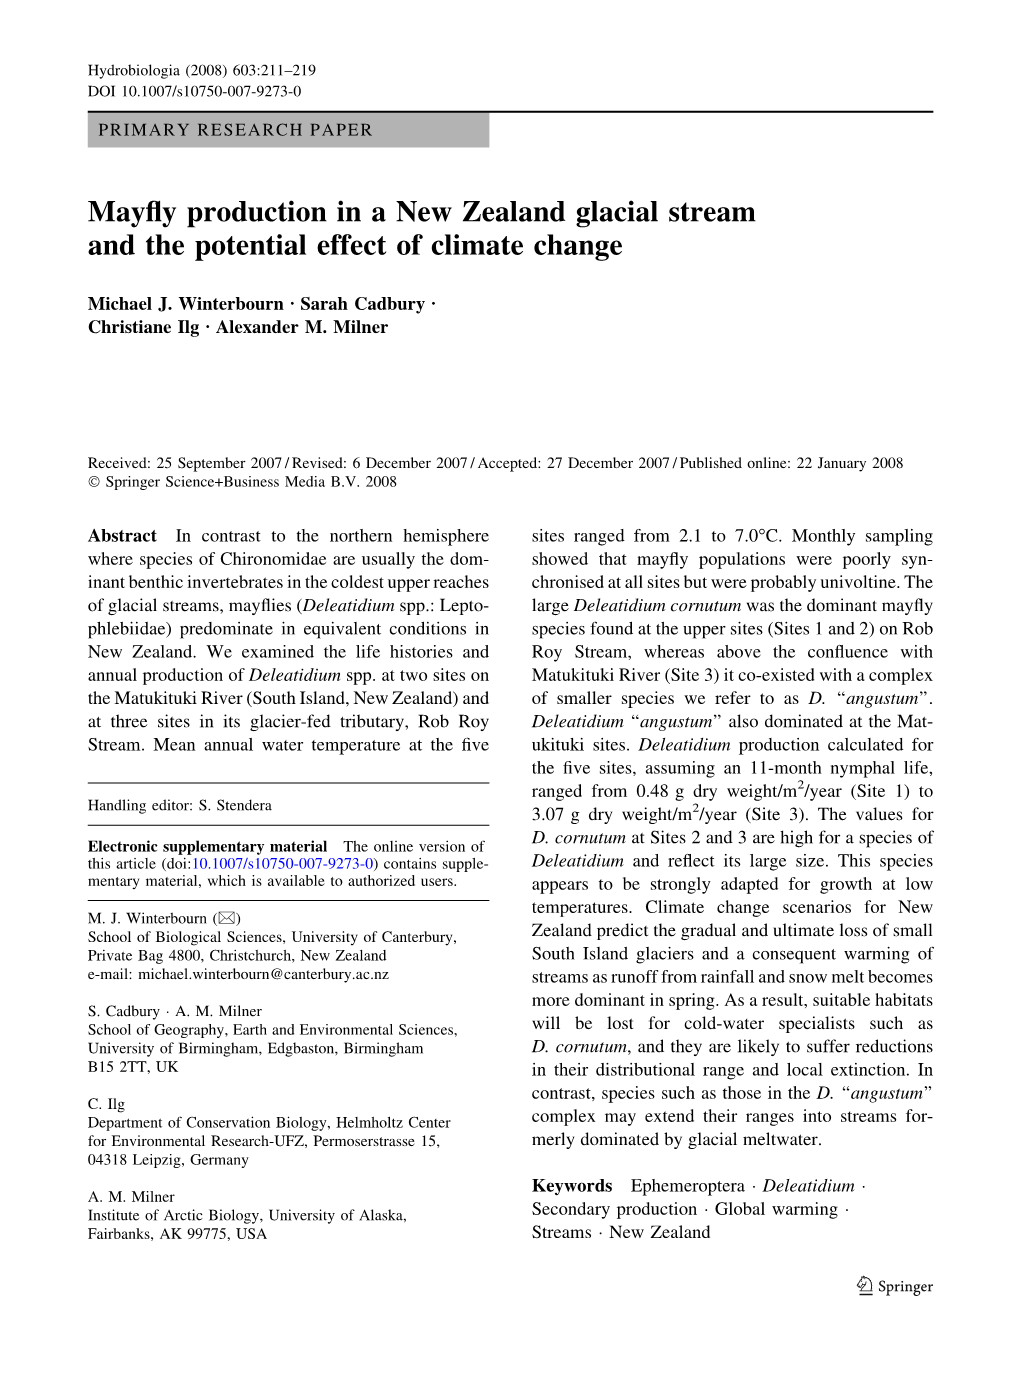 Mayfly Production in a New Zealand Glacial Stream and the Potential